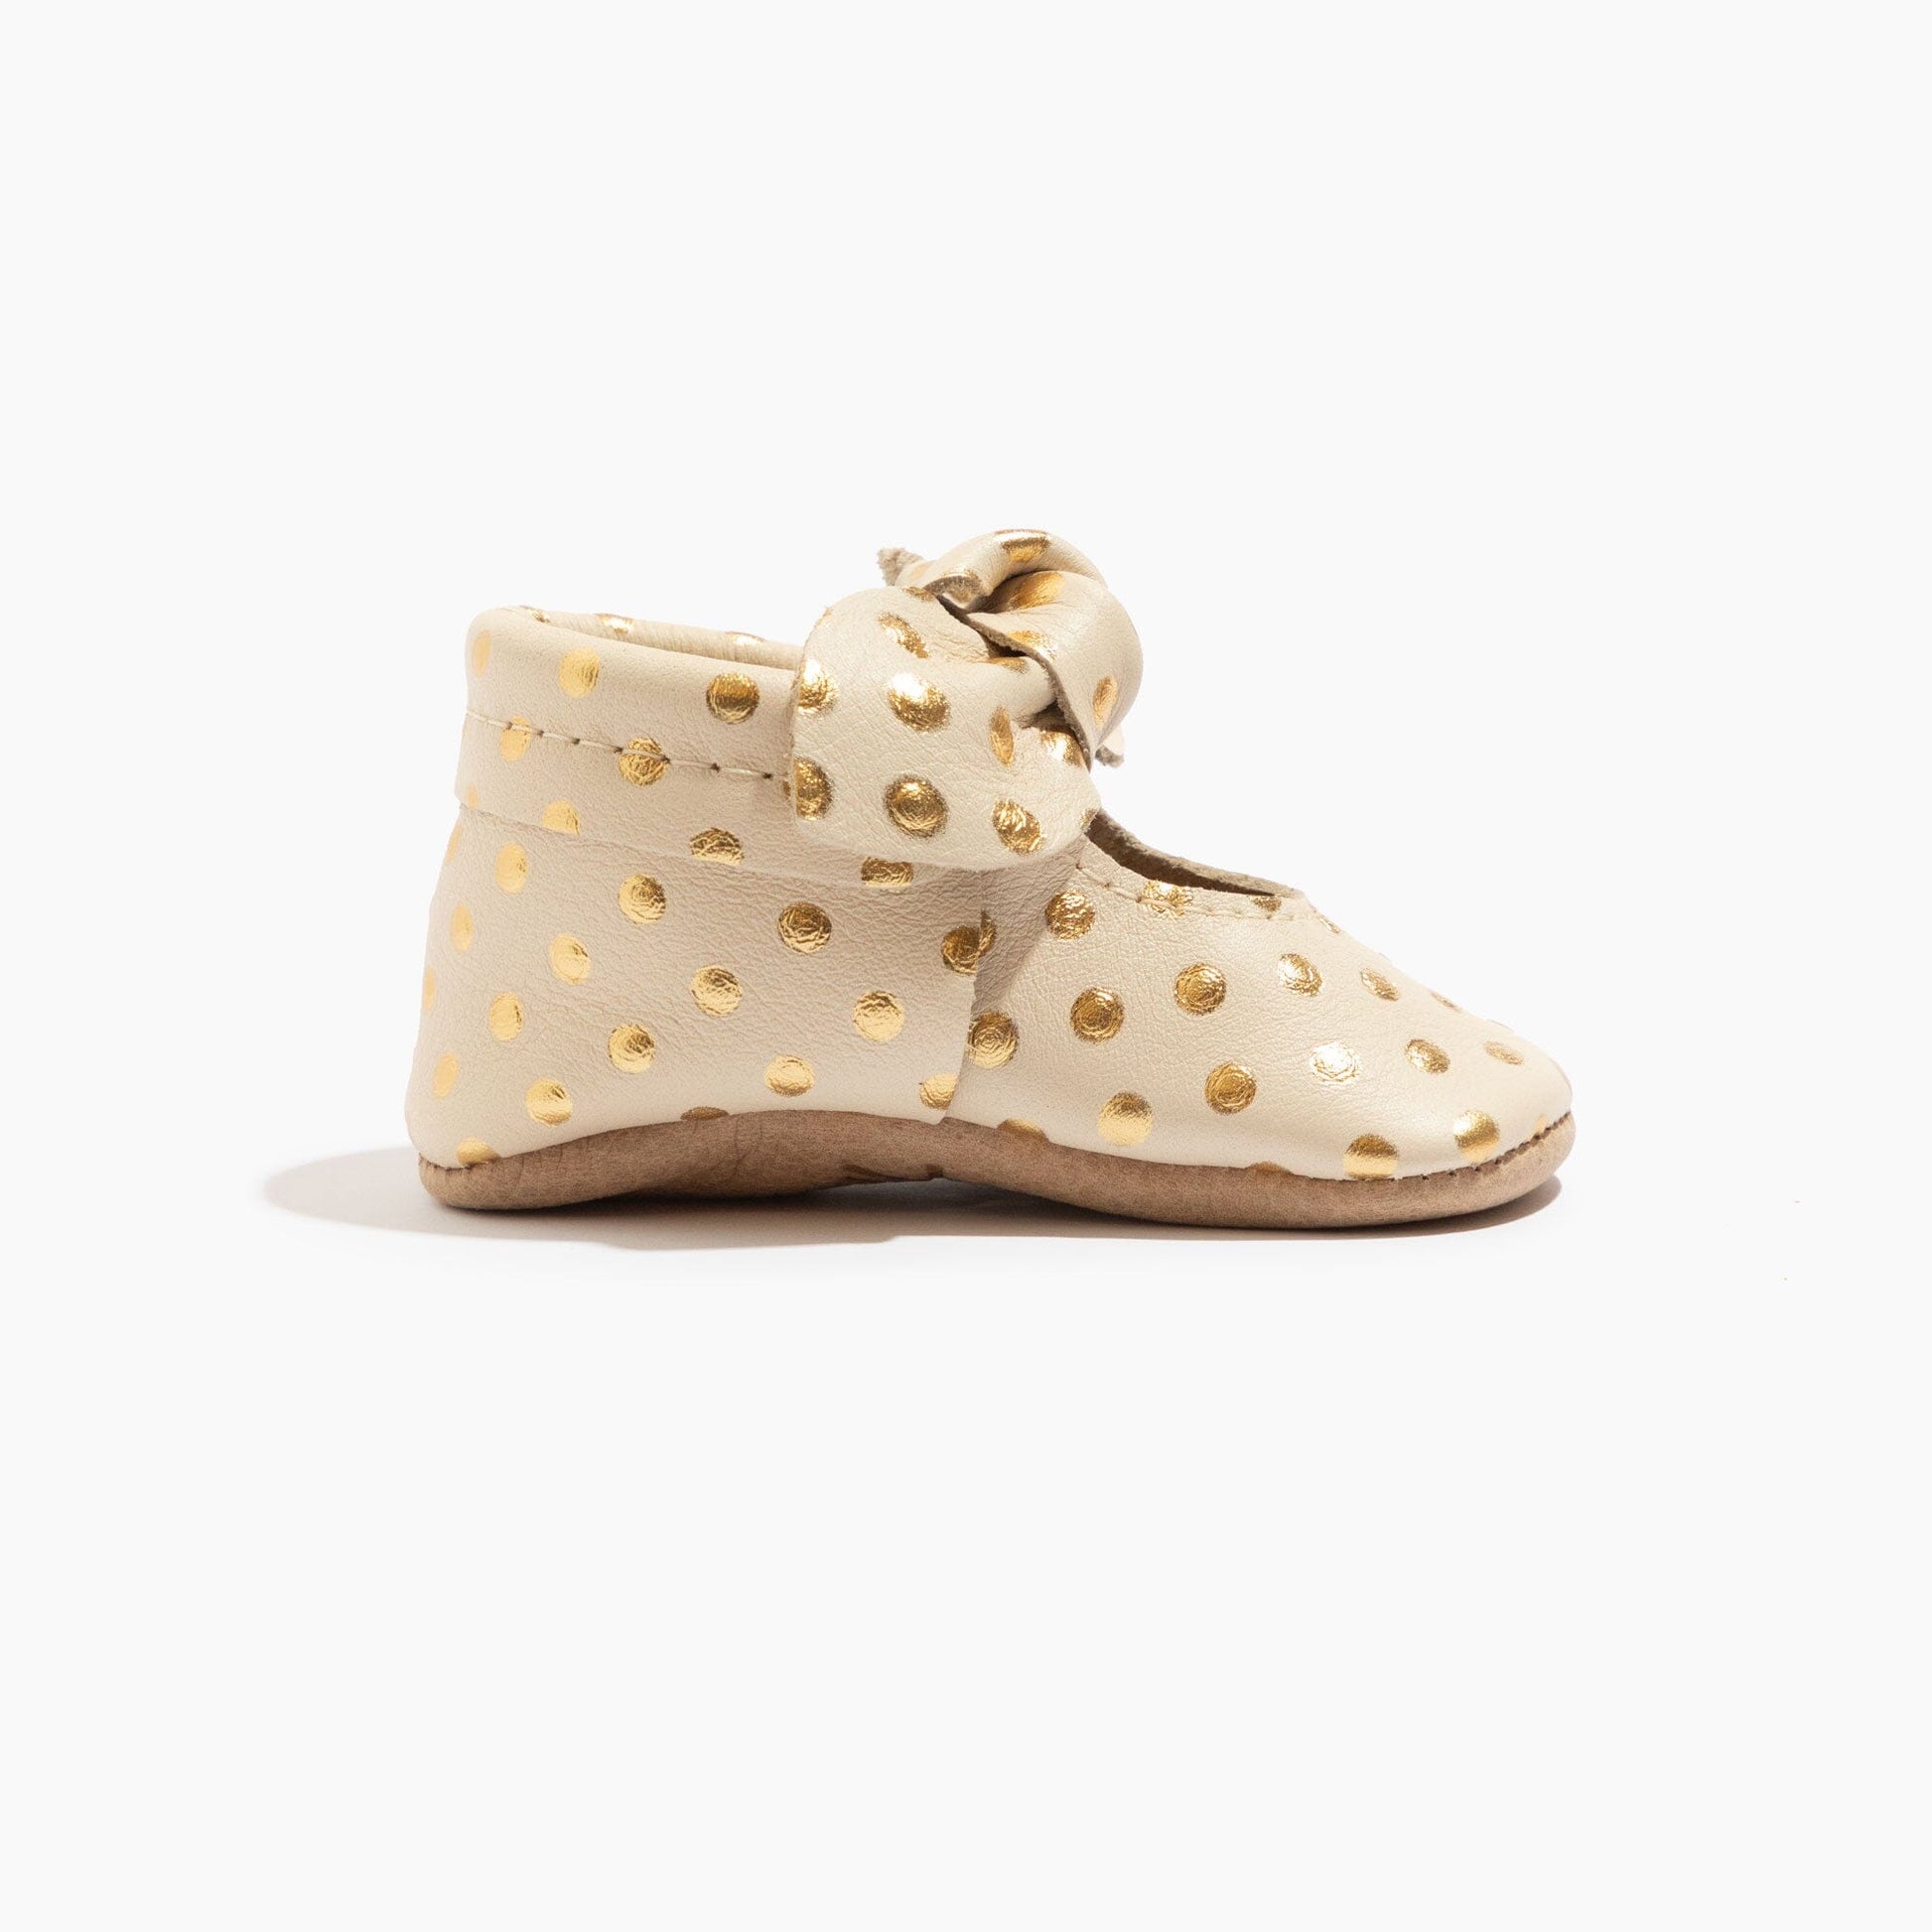 Cream Confetti Knotted Bow Mocc Knotted Bow Mocc Soft Sole 